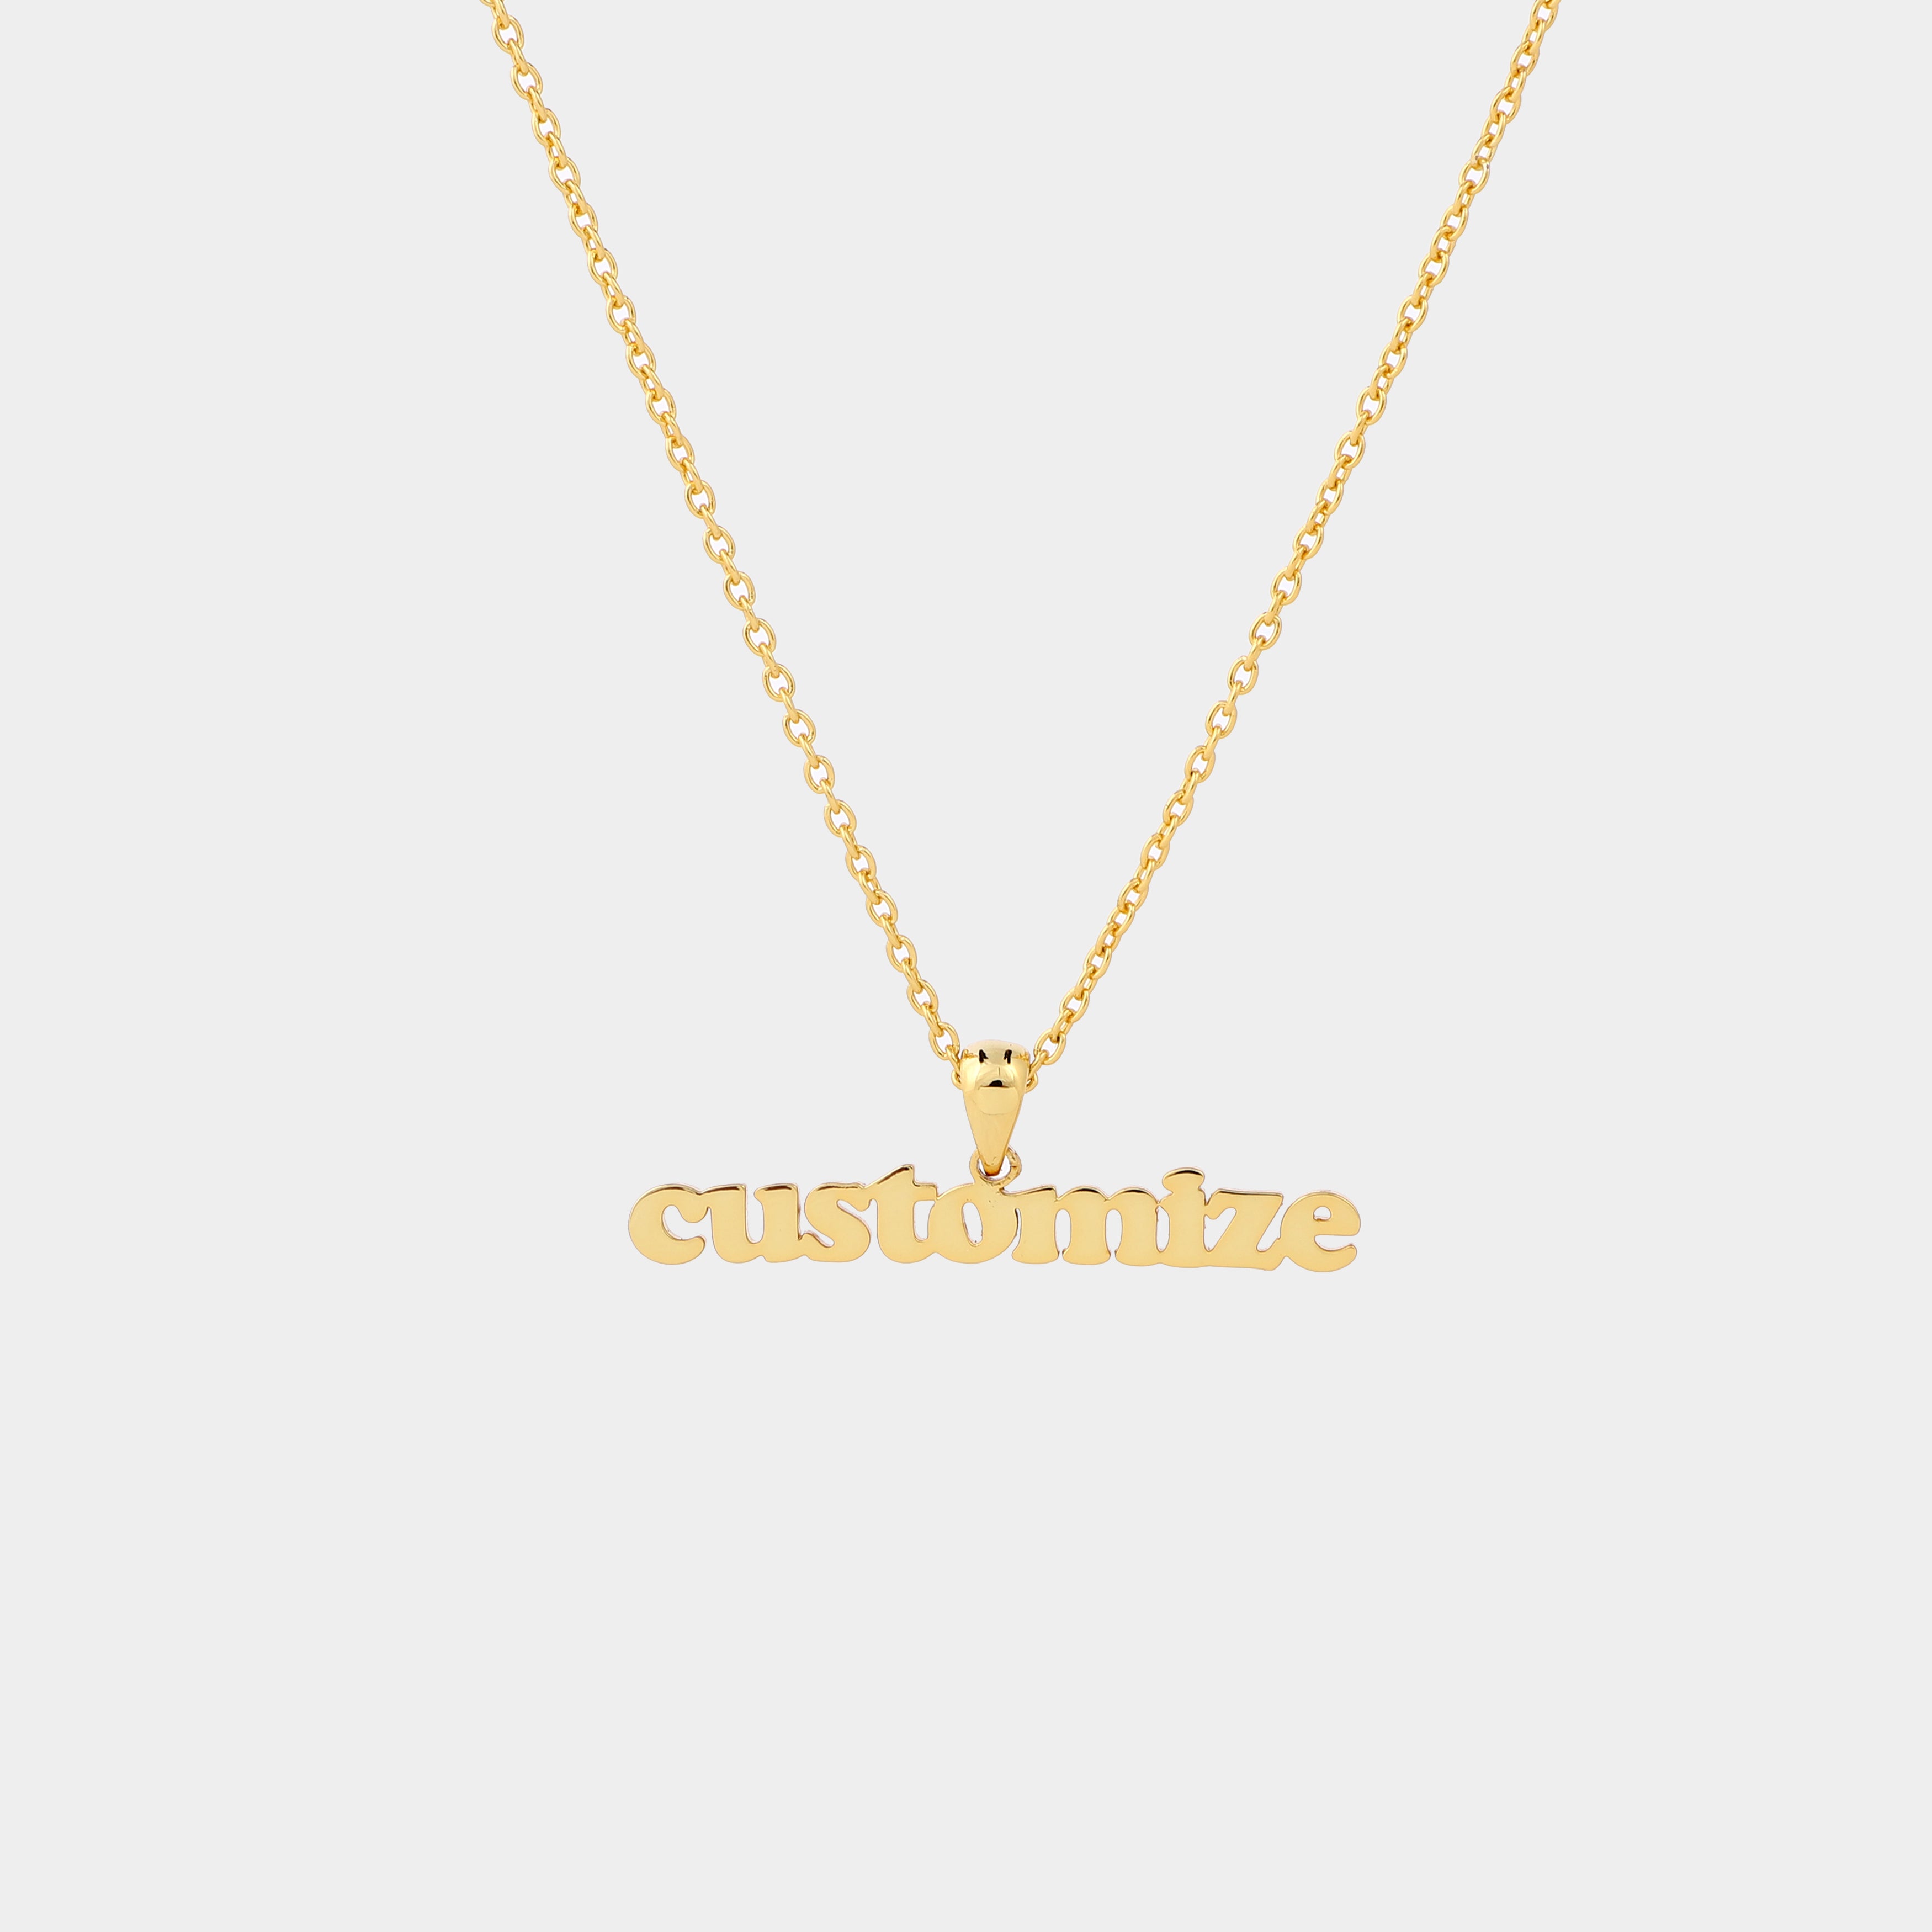 PERSONALIZE NECKLACE NAME GOLD